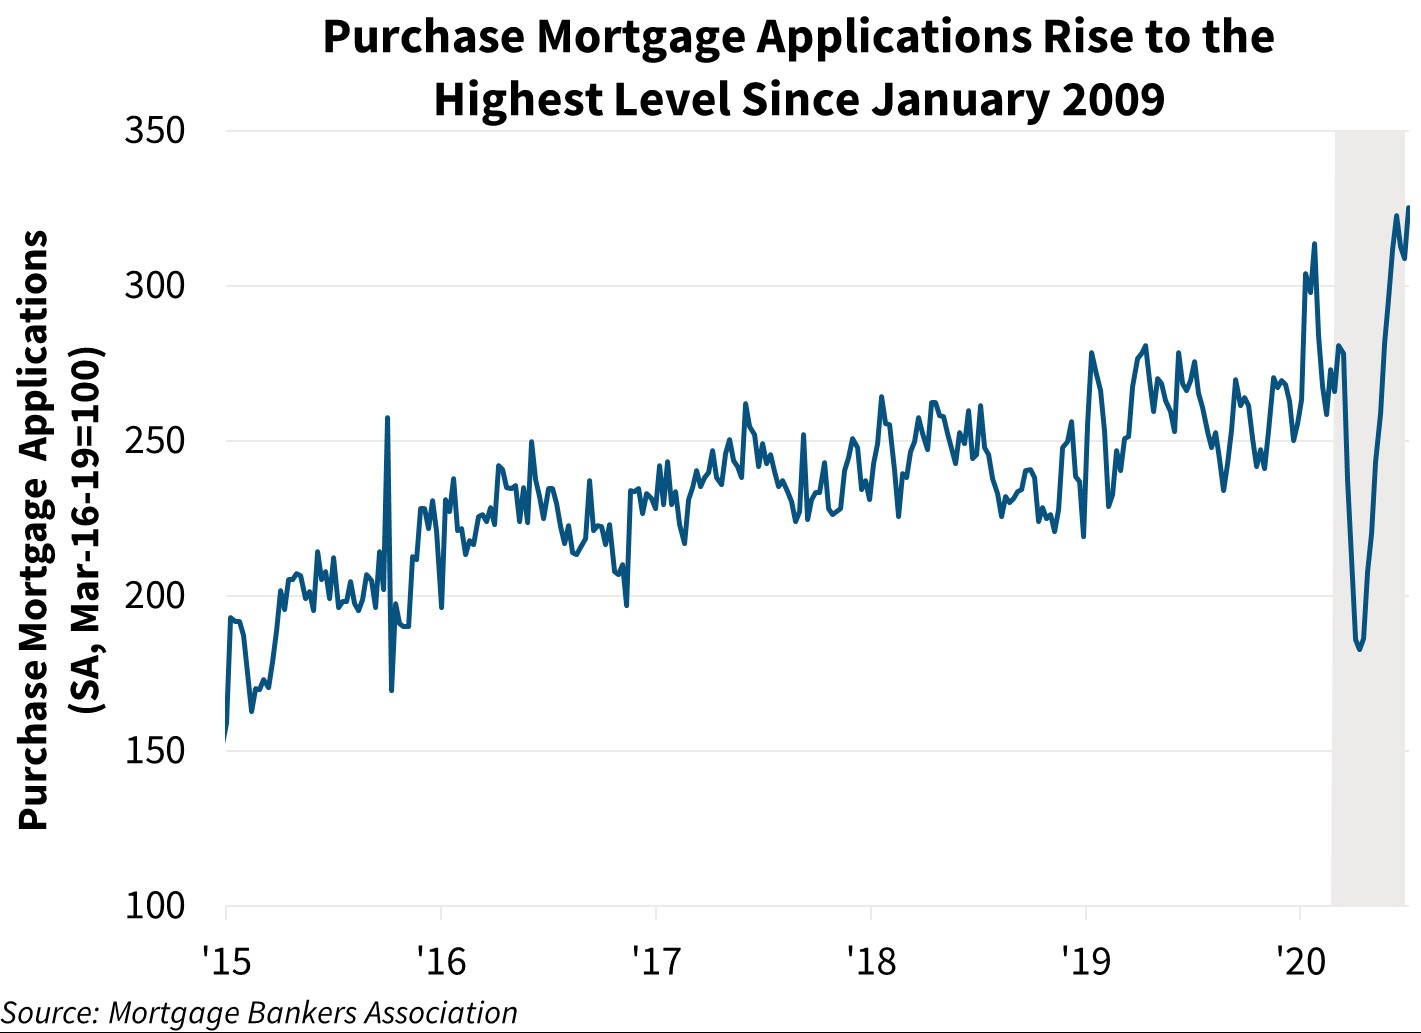  Purchase Mortgage Applications Rise to the Highest Level Since January 2009 